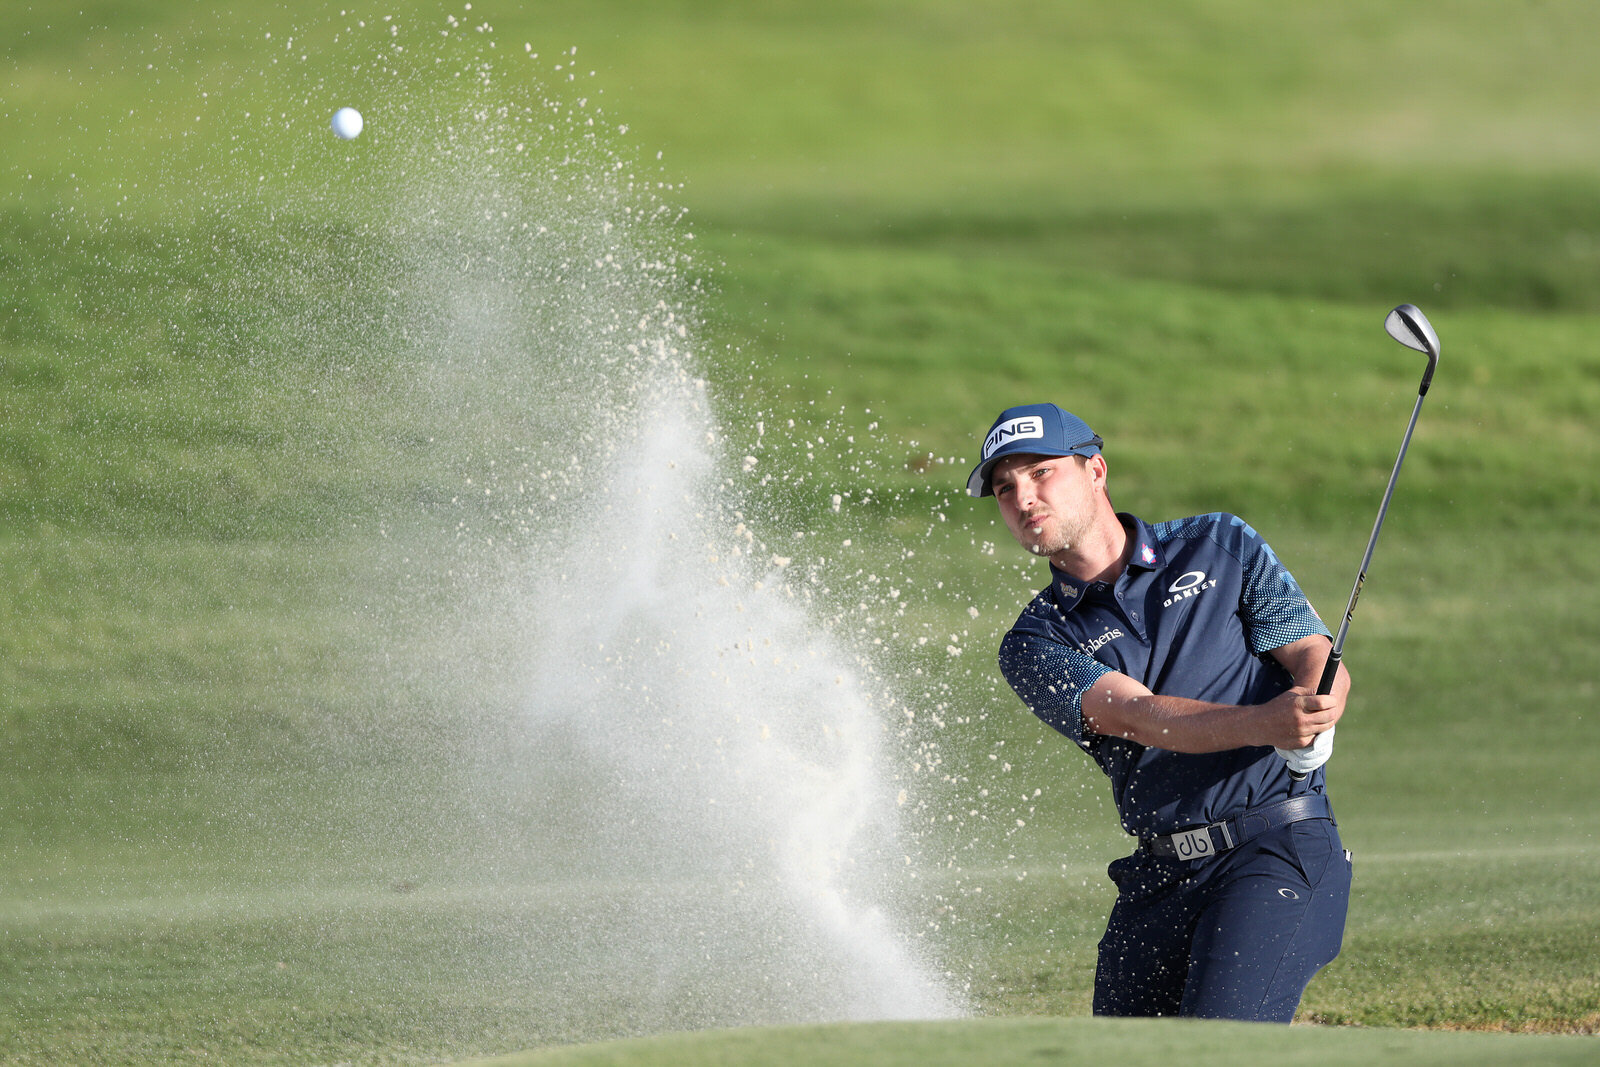  LAS VEGAS, NEVADA - OCTOBER 09: Austin Cook hits from the bunker on the 9th hole during round two of the Shriners Hospitals For Children Open at TPC Summerlin on October 09, 2020 in Las Vegas, Nevada. (Photo by Matthew Stockman/Getty Images) 